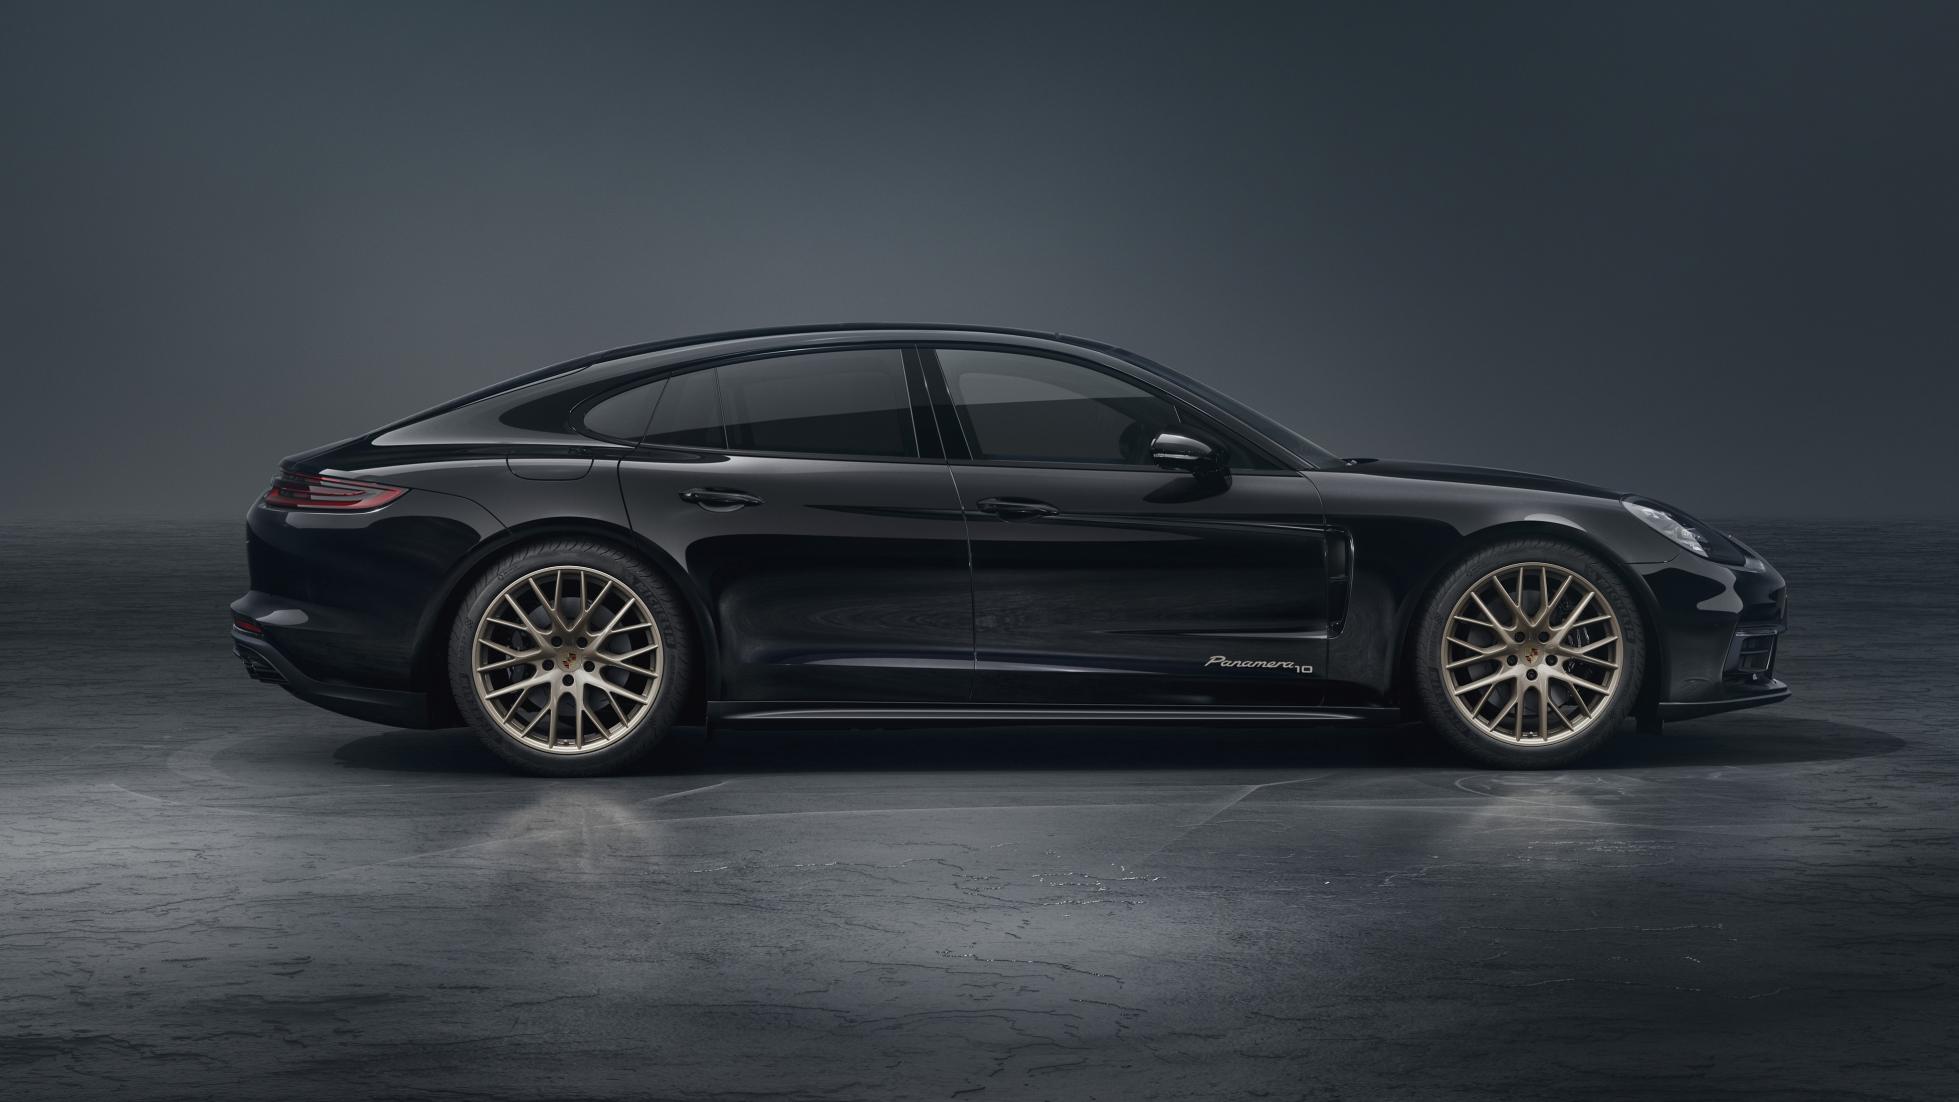 Is Porsche's 10 Years Edition the best looking Panamera yet?